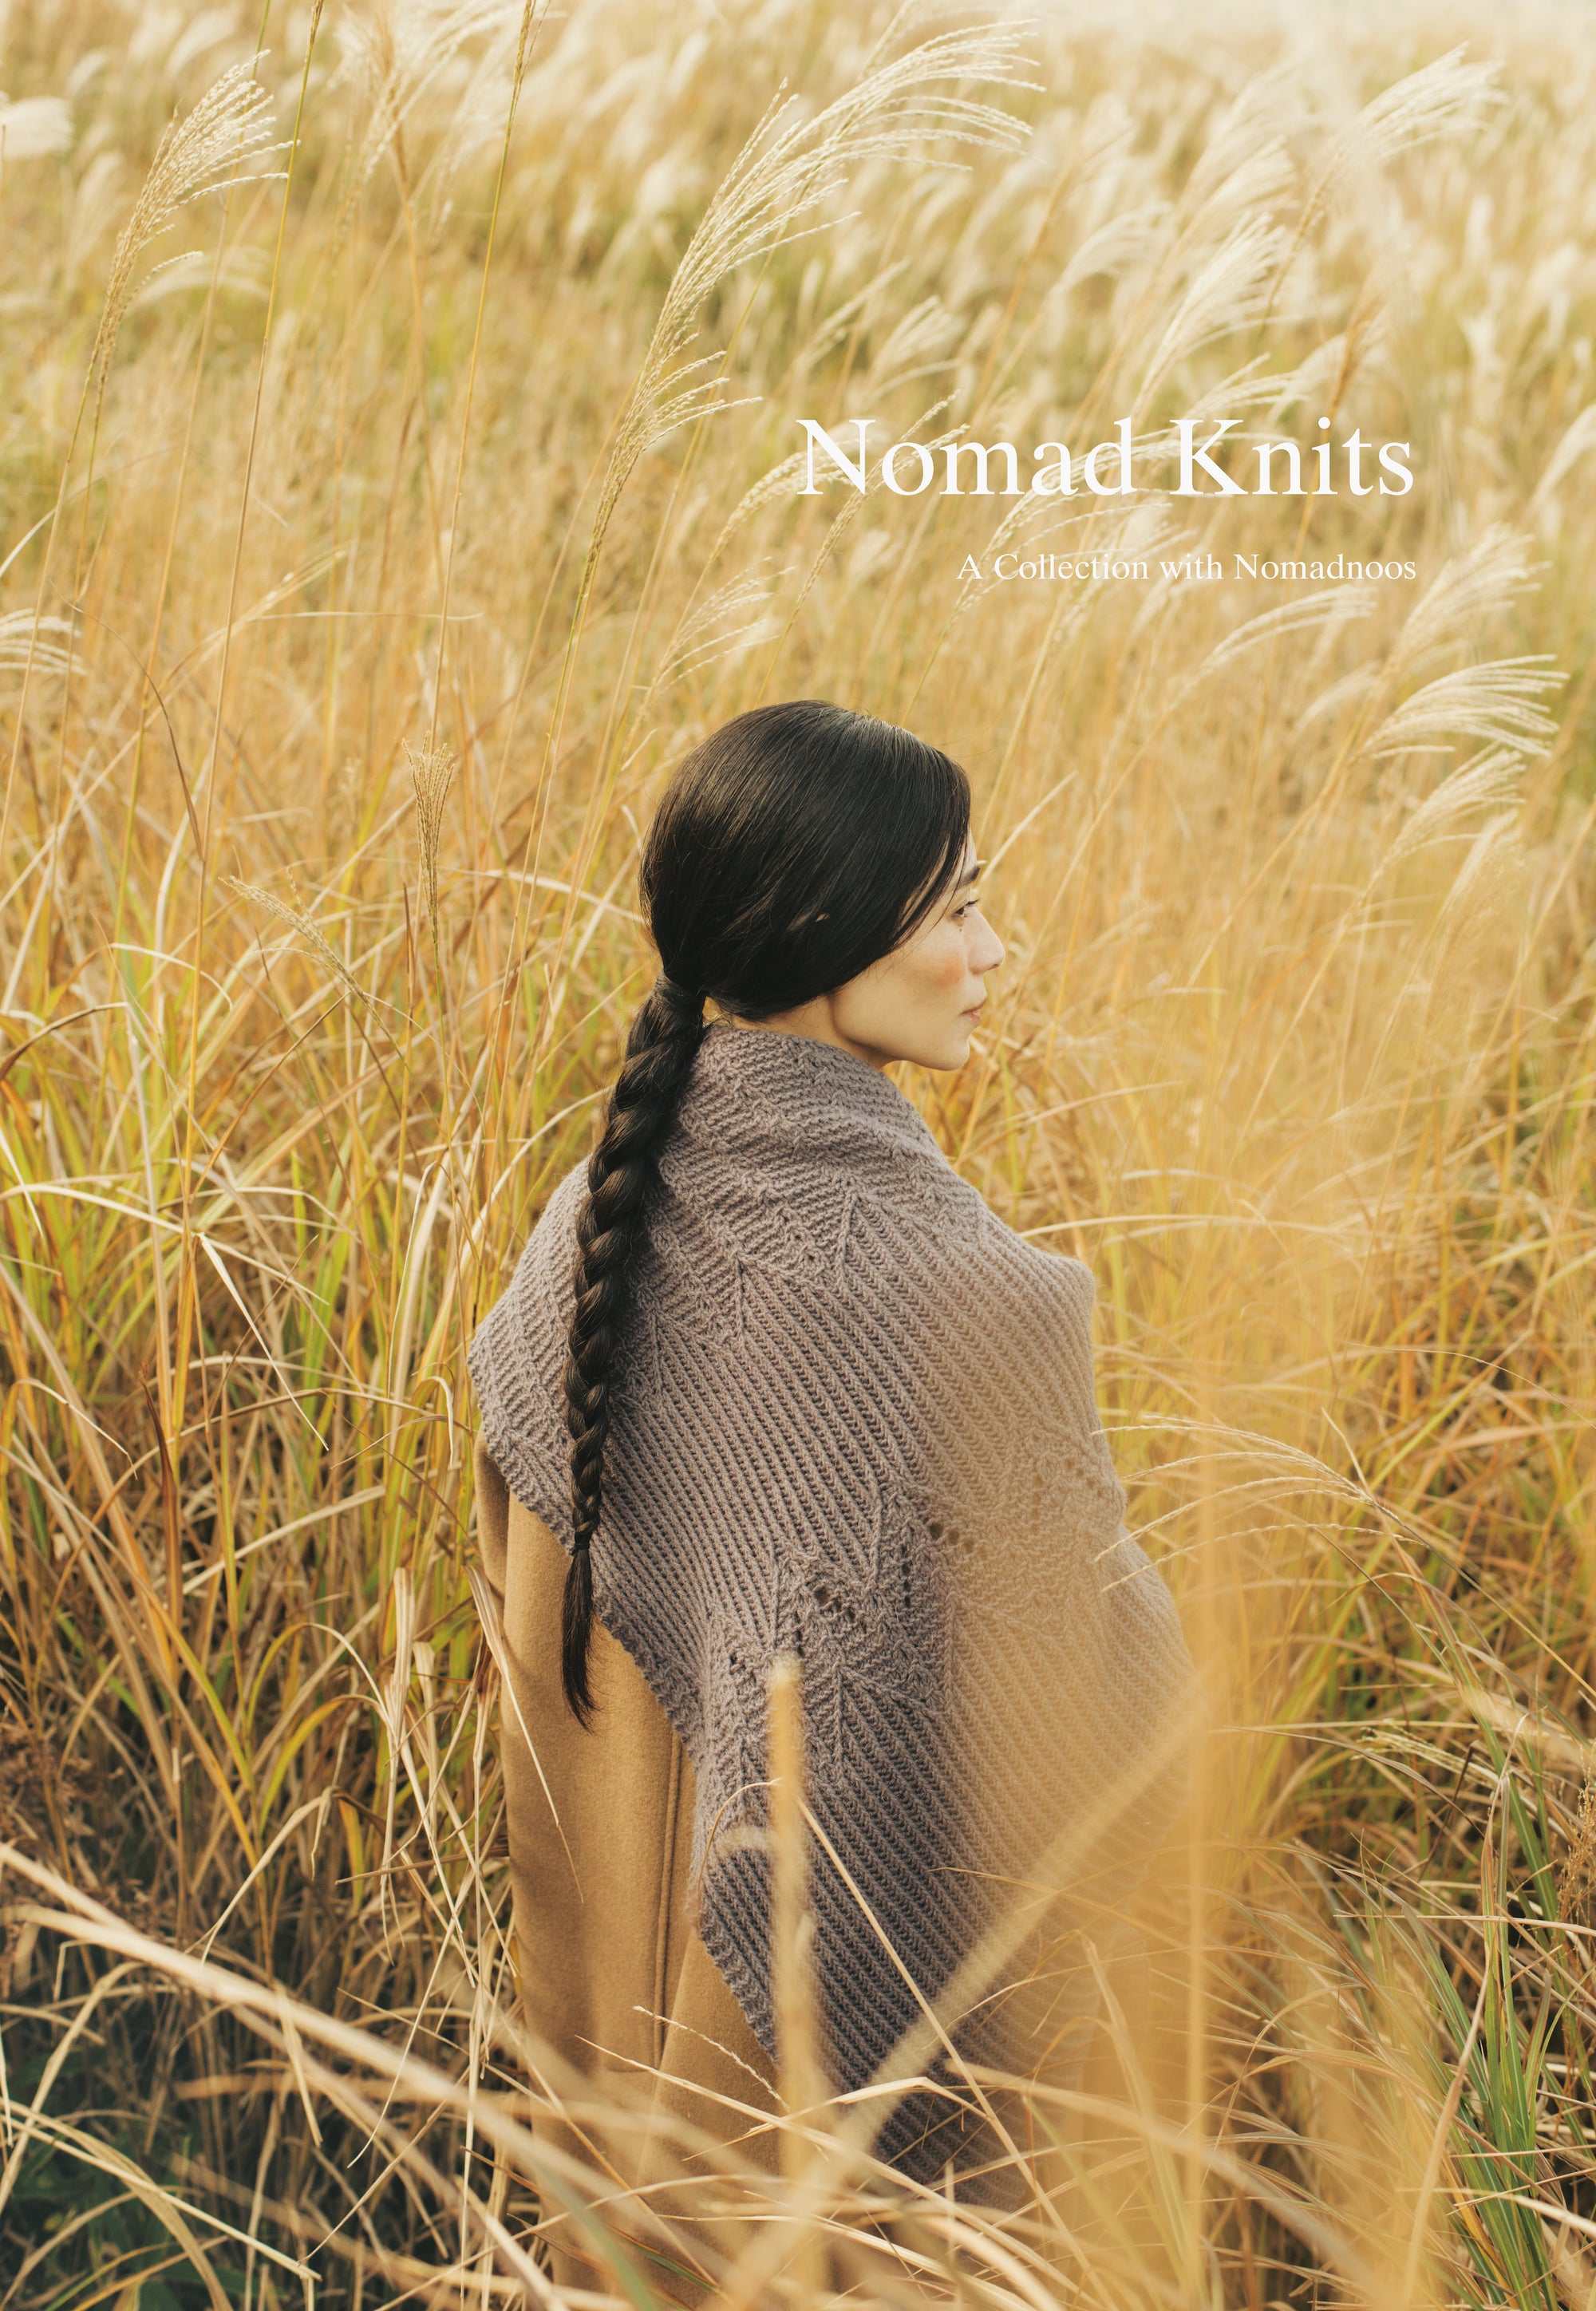 Nomad Knits – A Collection with Nomadnoos 展示会のご案内